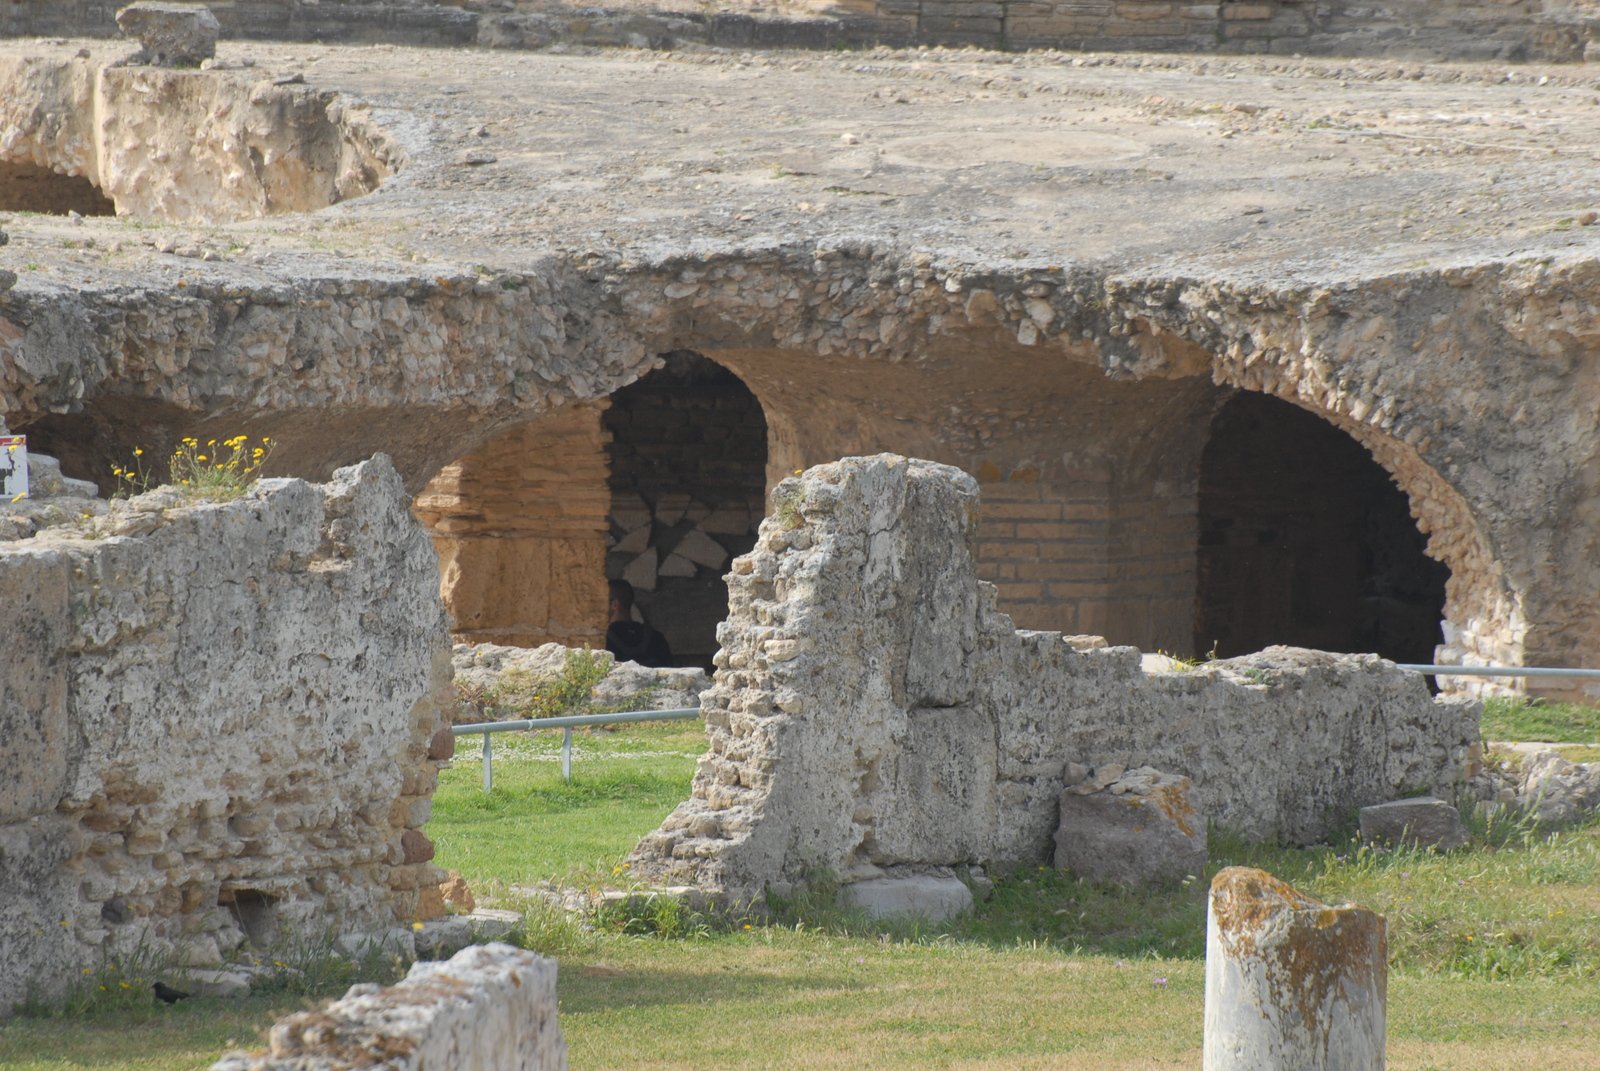 stone buildings and pillars, some with large round holes